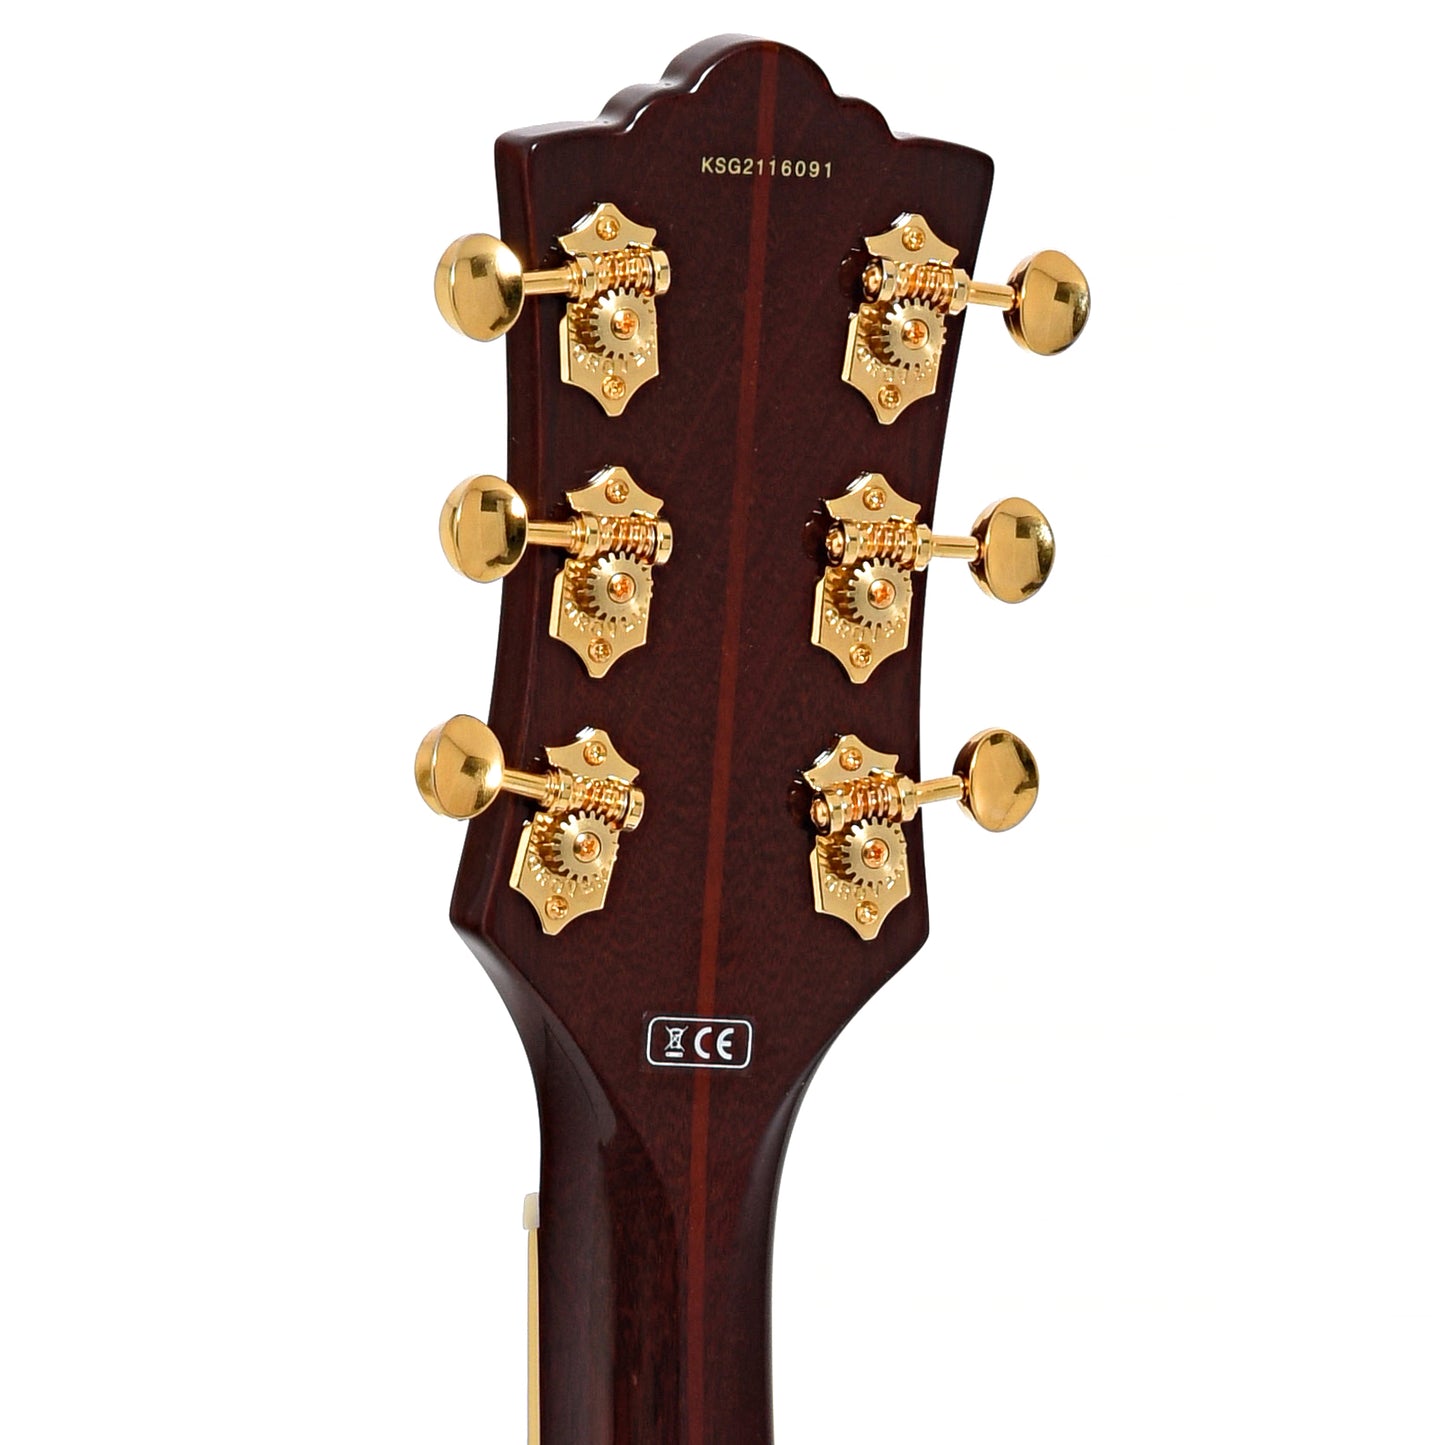 Back Headstock of Guild Newark St. Collection M-75 Aristocrat Hollow Body Archtop Guitar